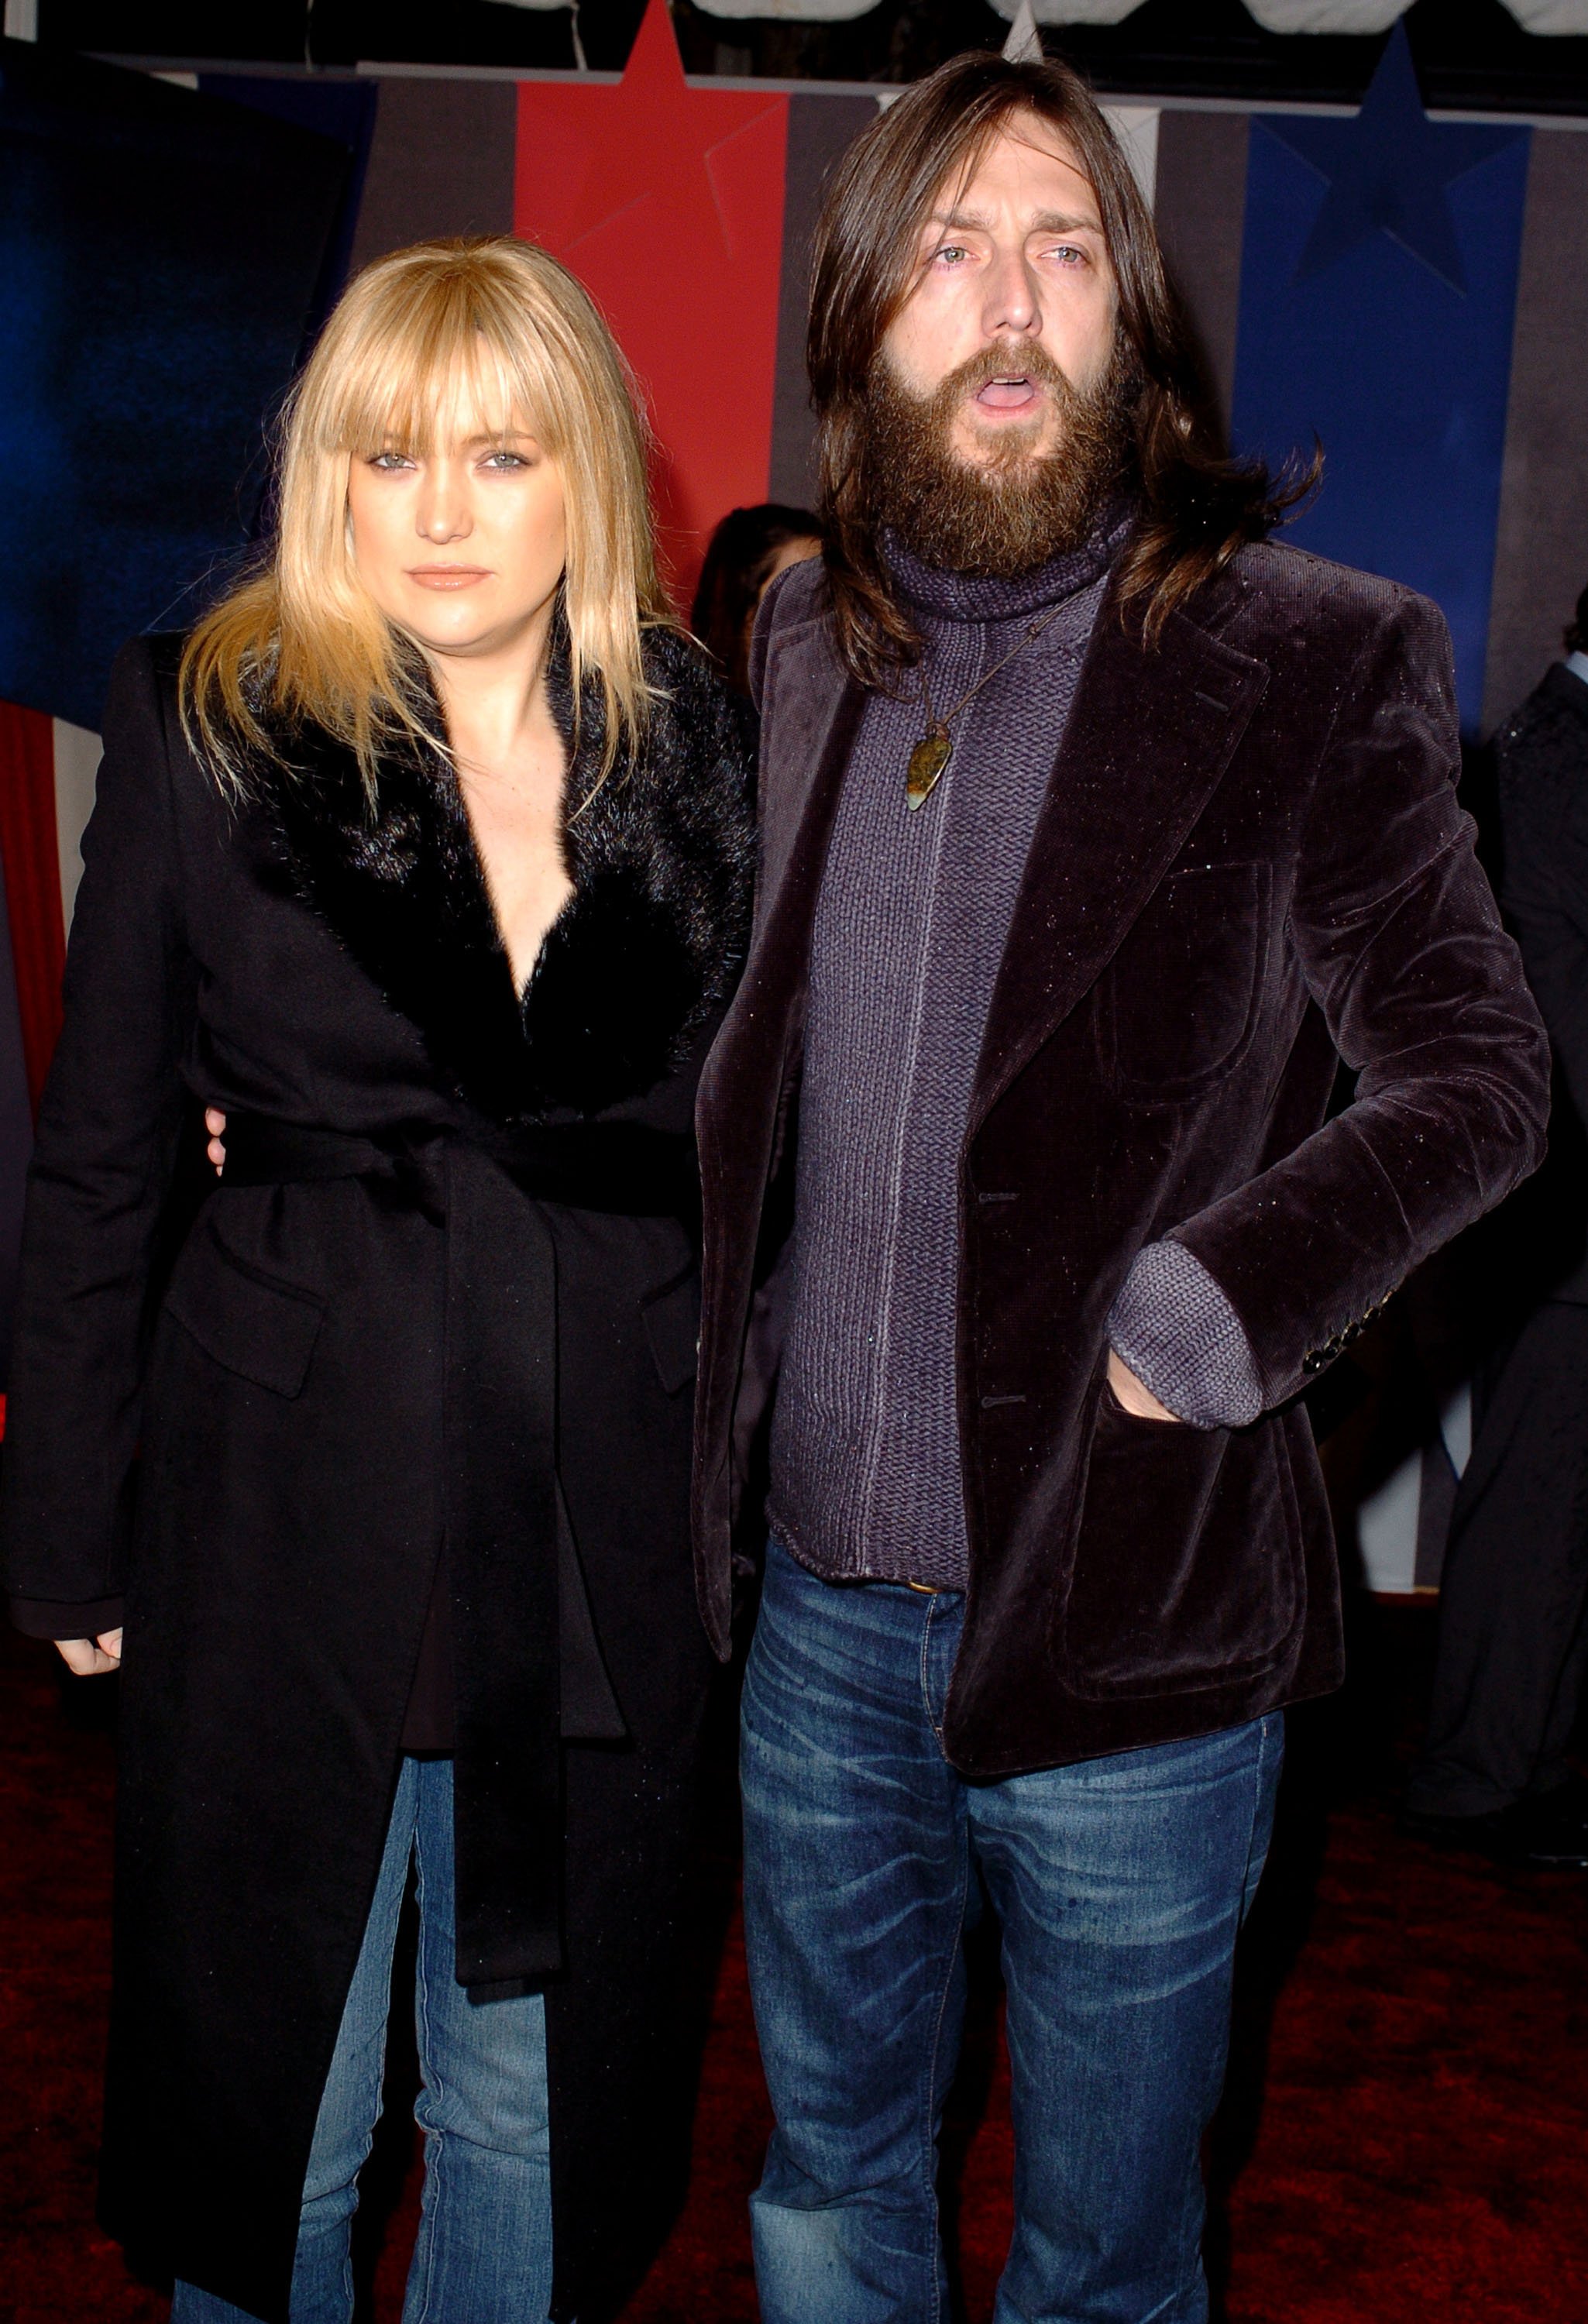 Kate Hudson and Chris Robinson during "Miracle" premiere at El Capitan Theater in Hollywood, California.  / Source: Getty Images